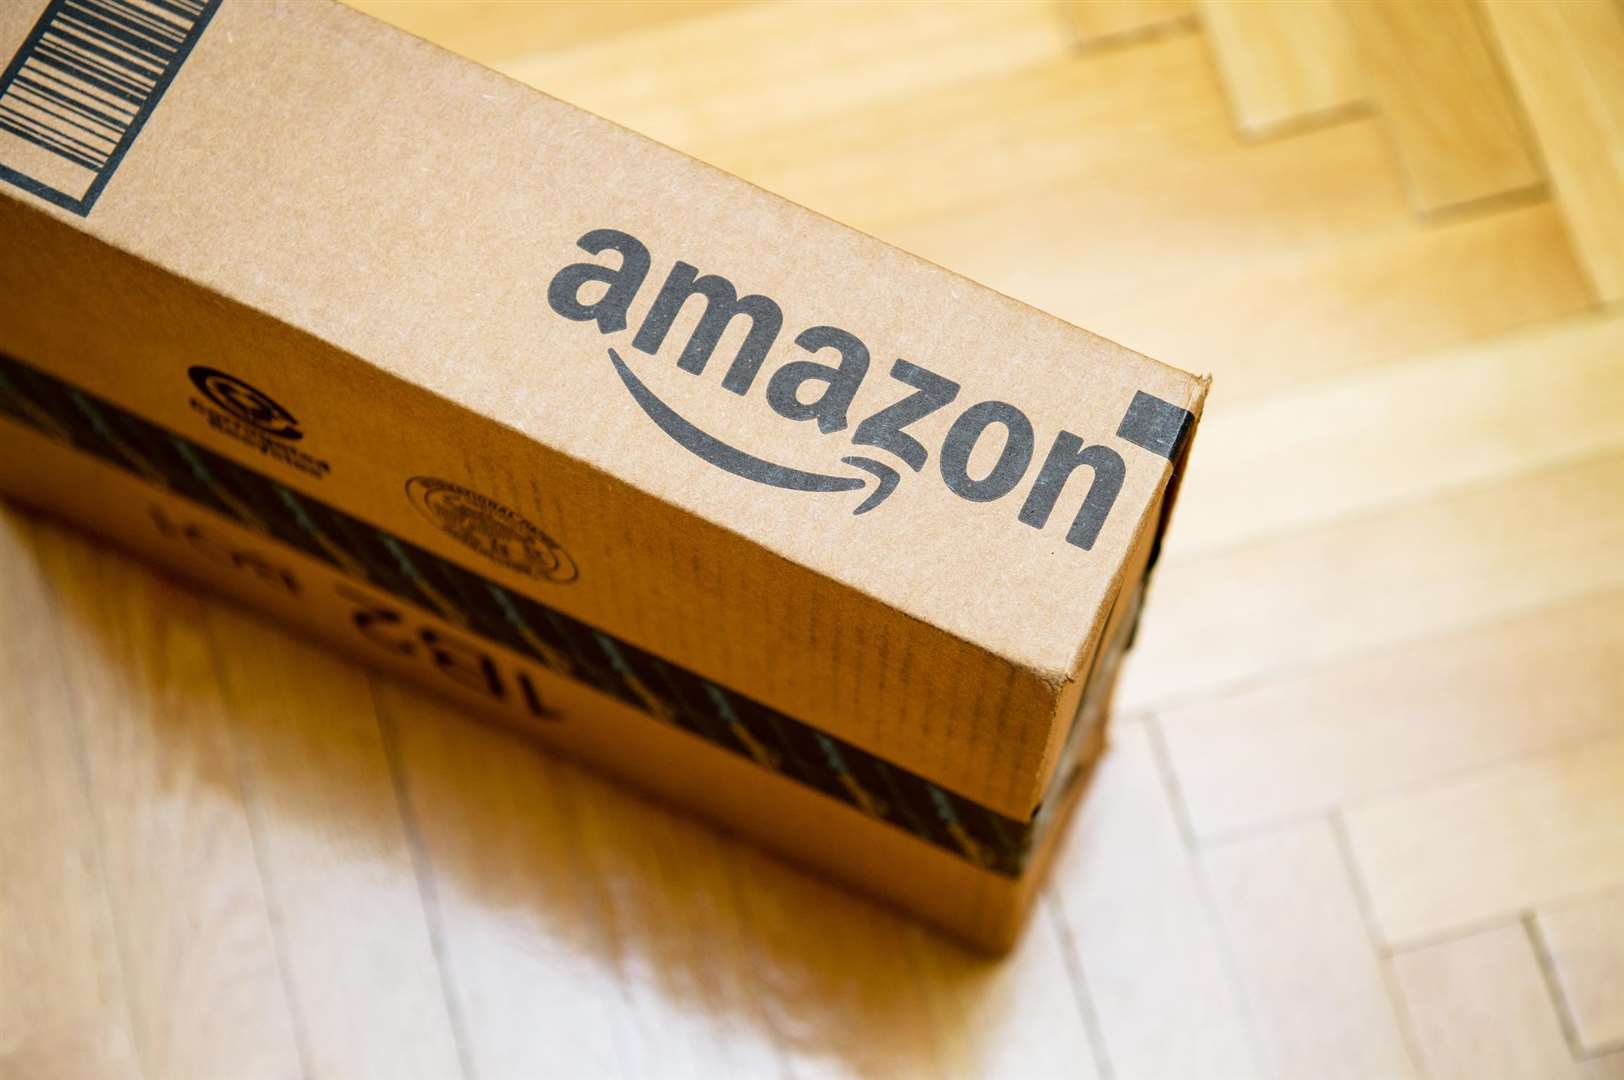 Amazon is opening a warehouse in Medway